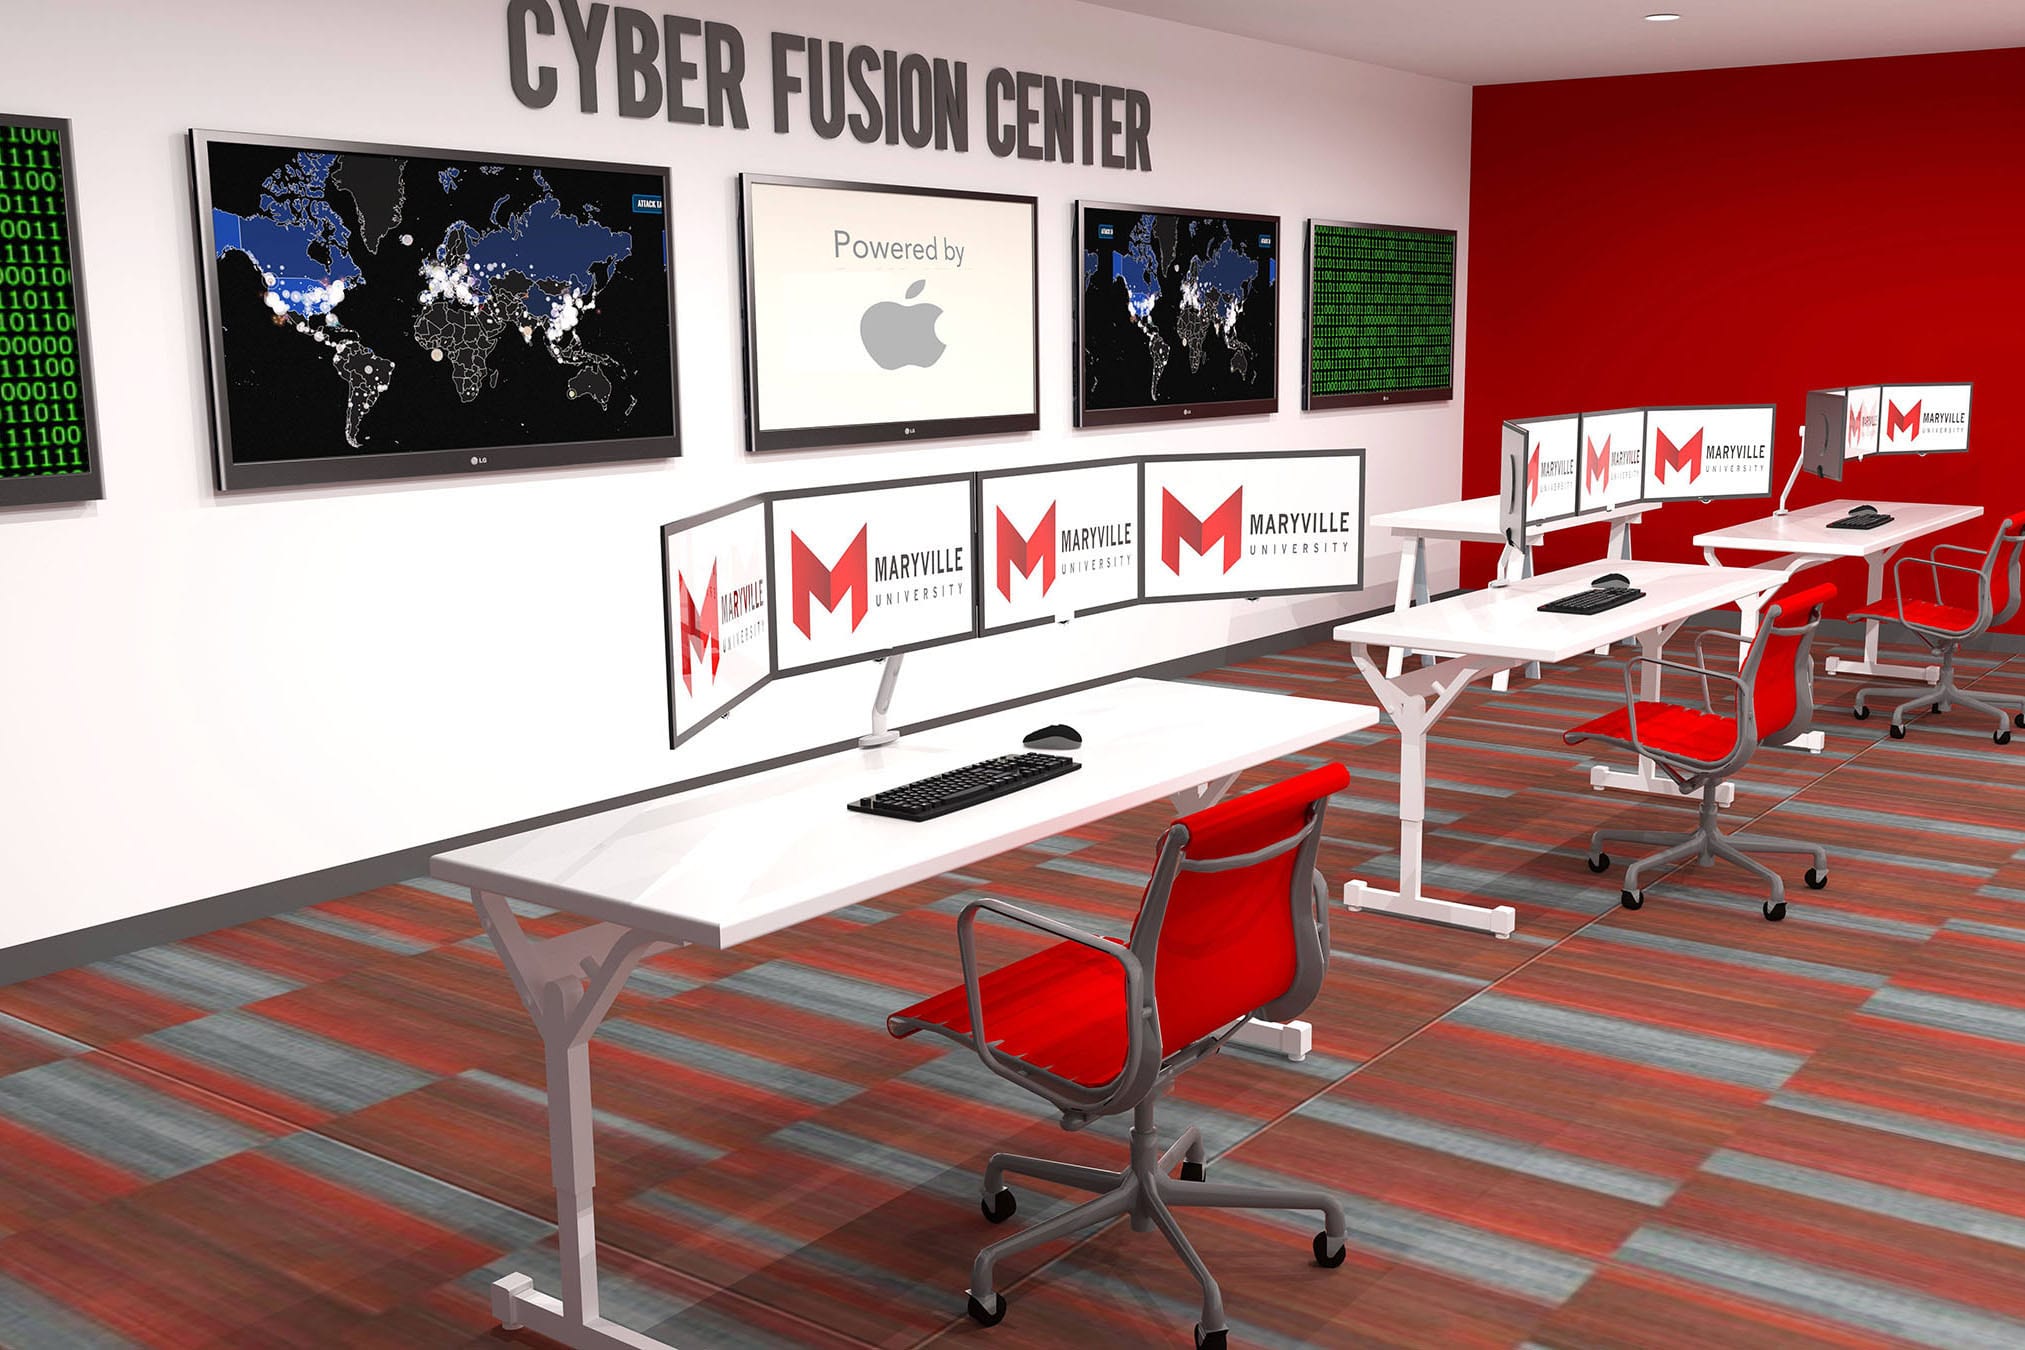 Maryville University's Cyber Fusion Center